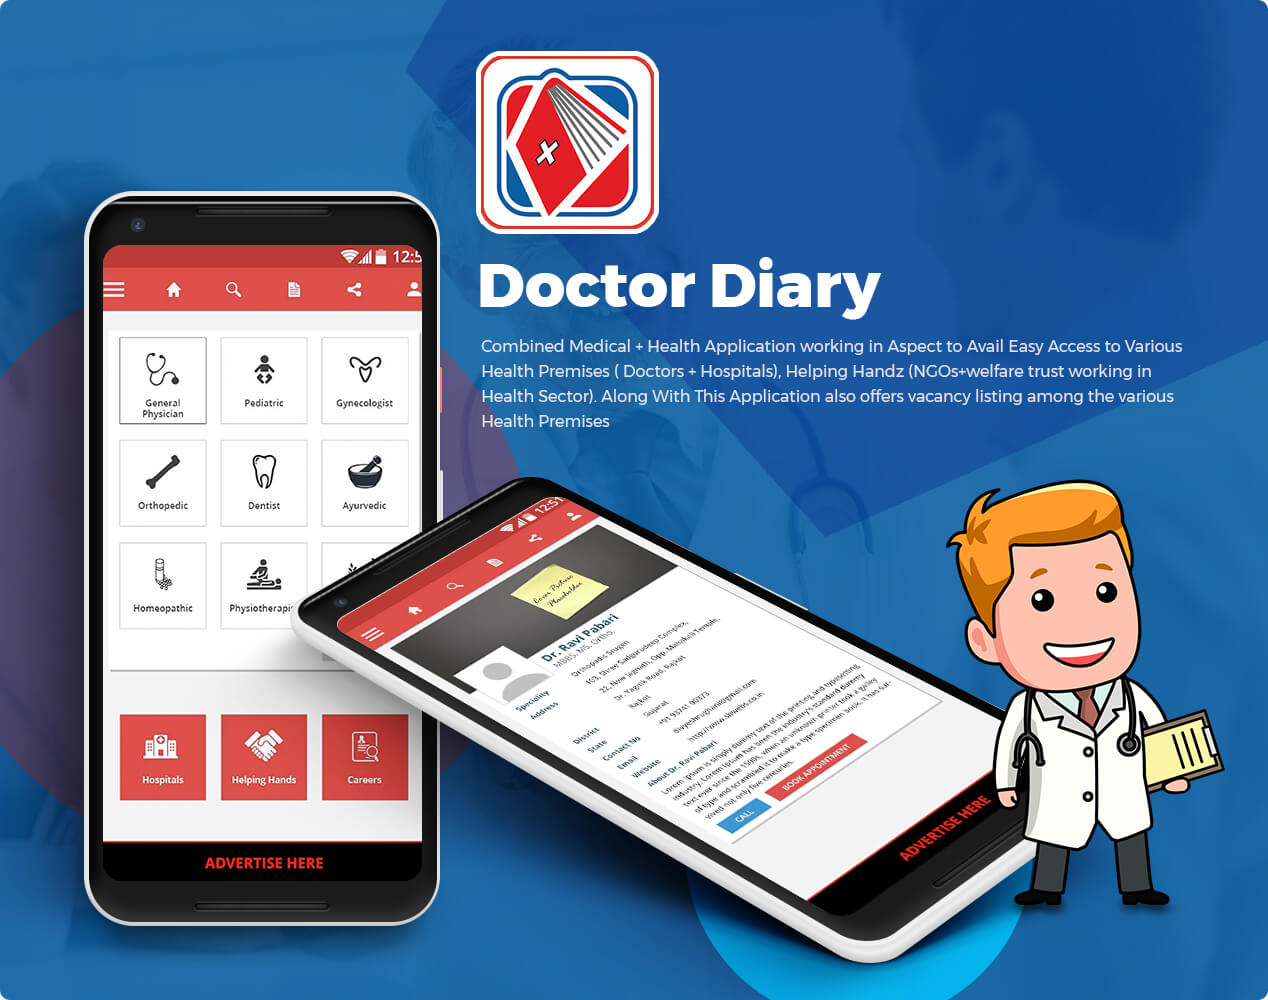 DOCTOR DIARY